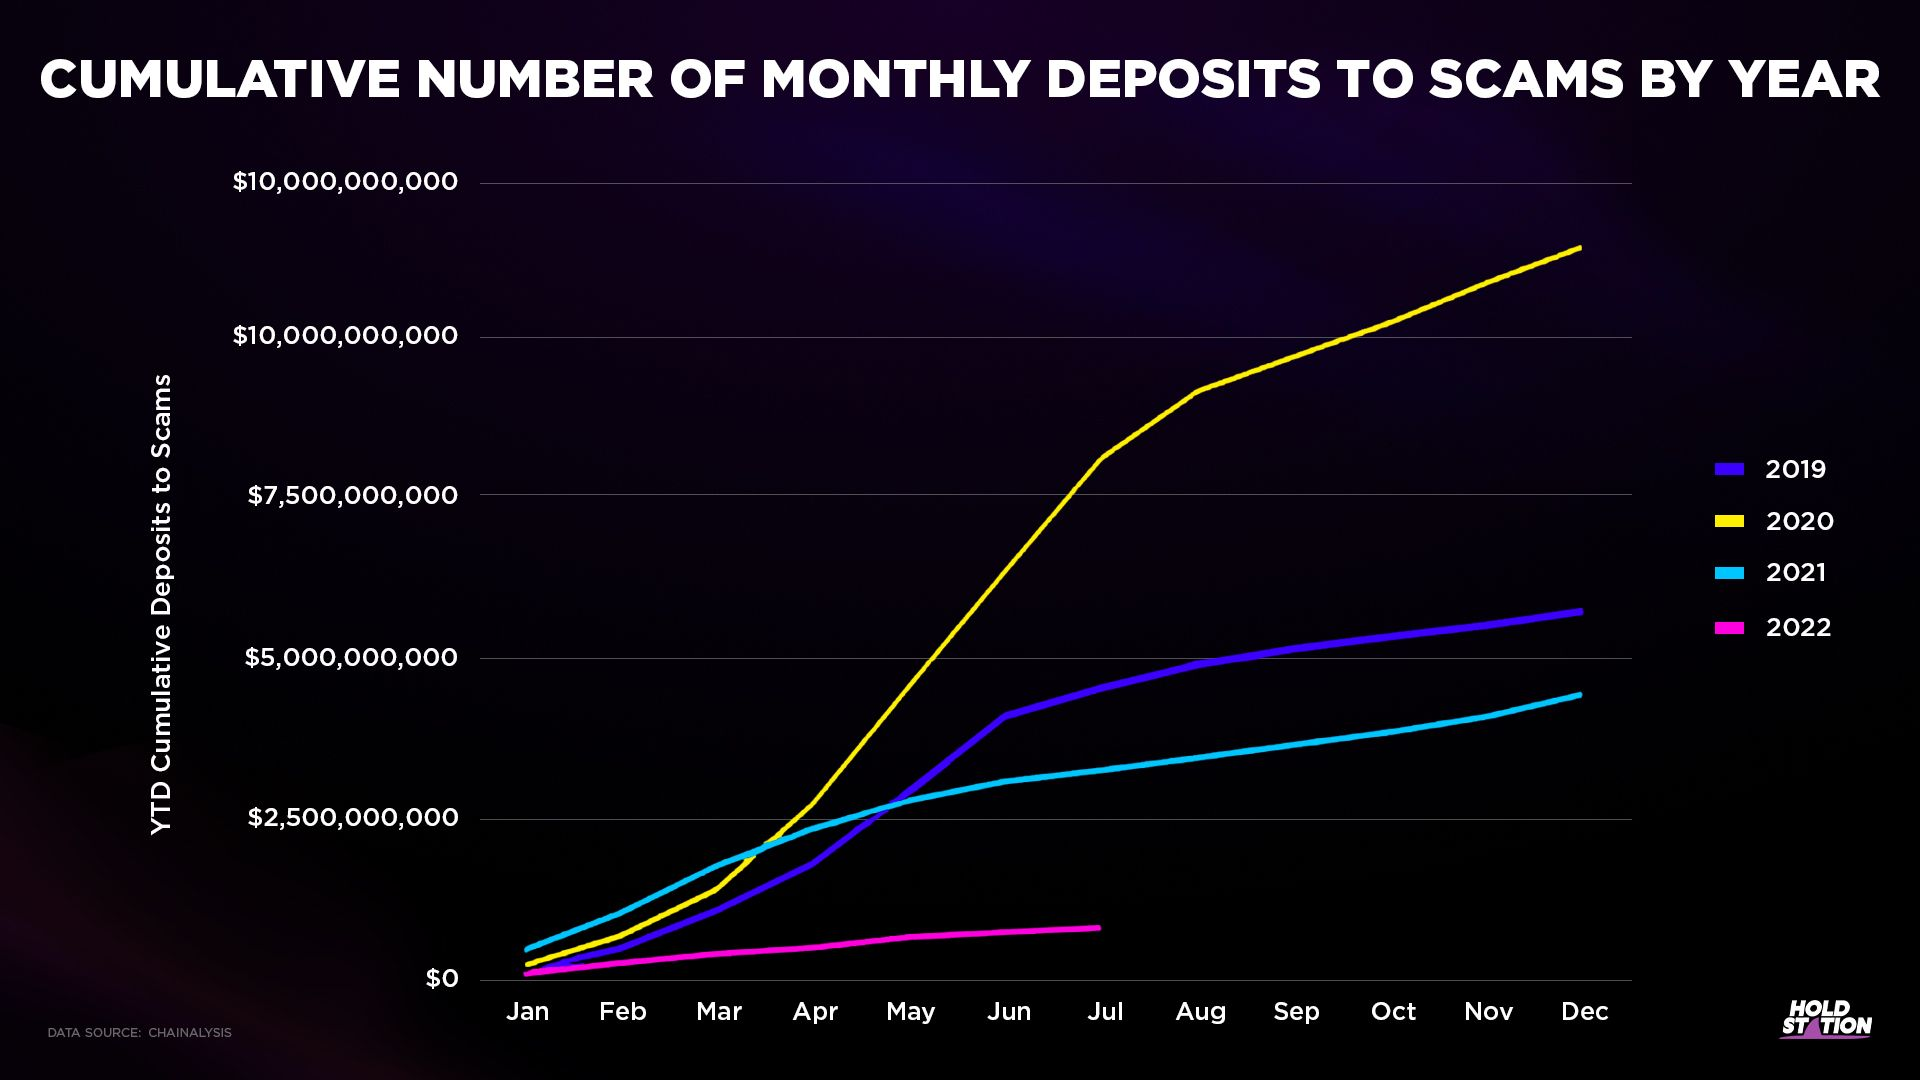 Cumulative number of monthly deposits to scams from 2019 to 2022